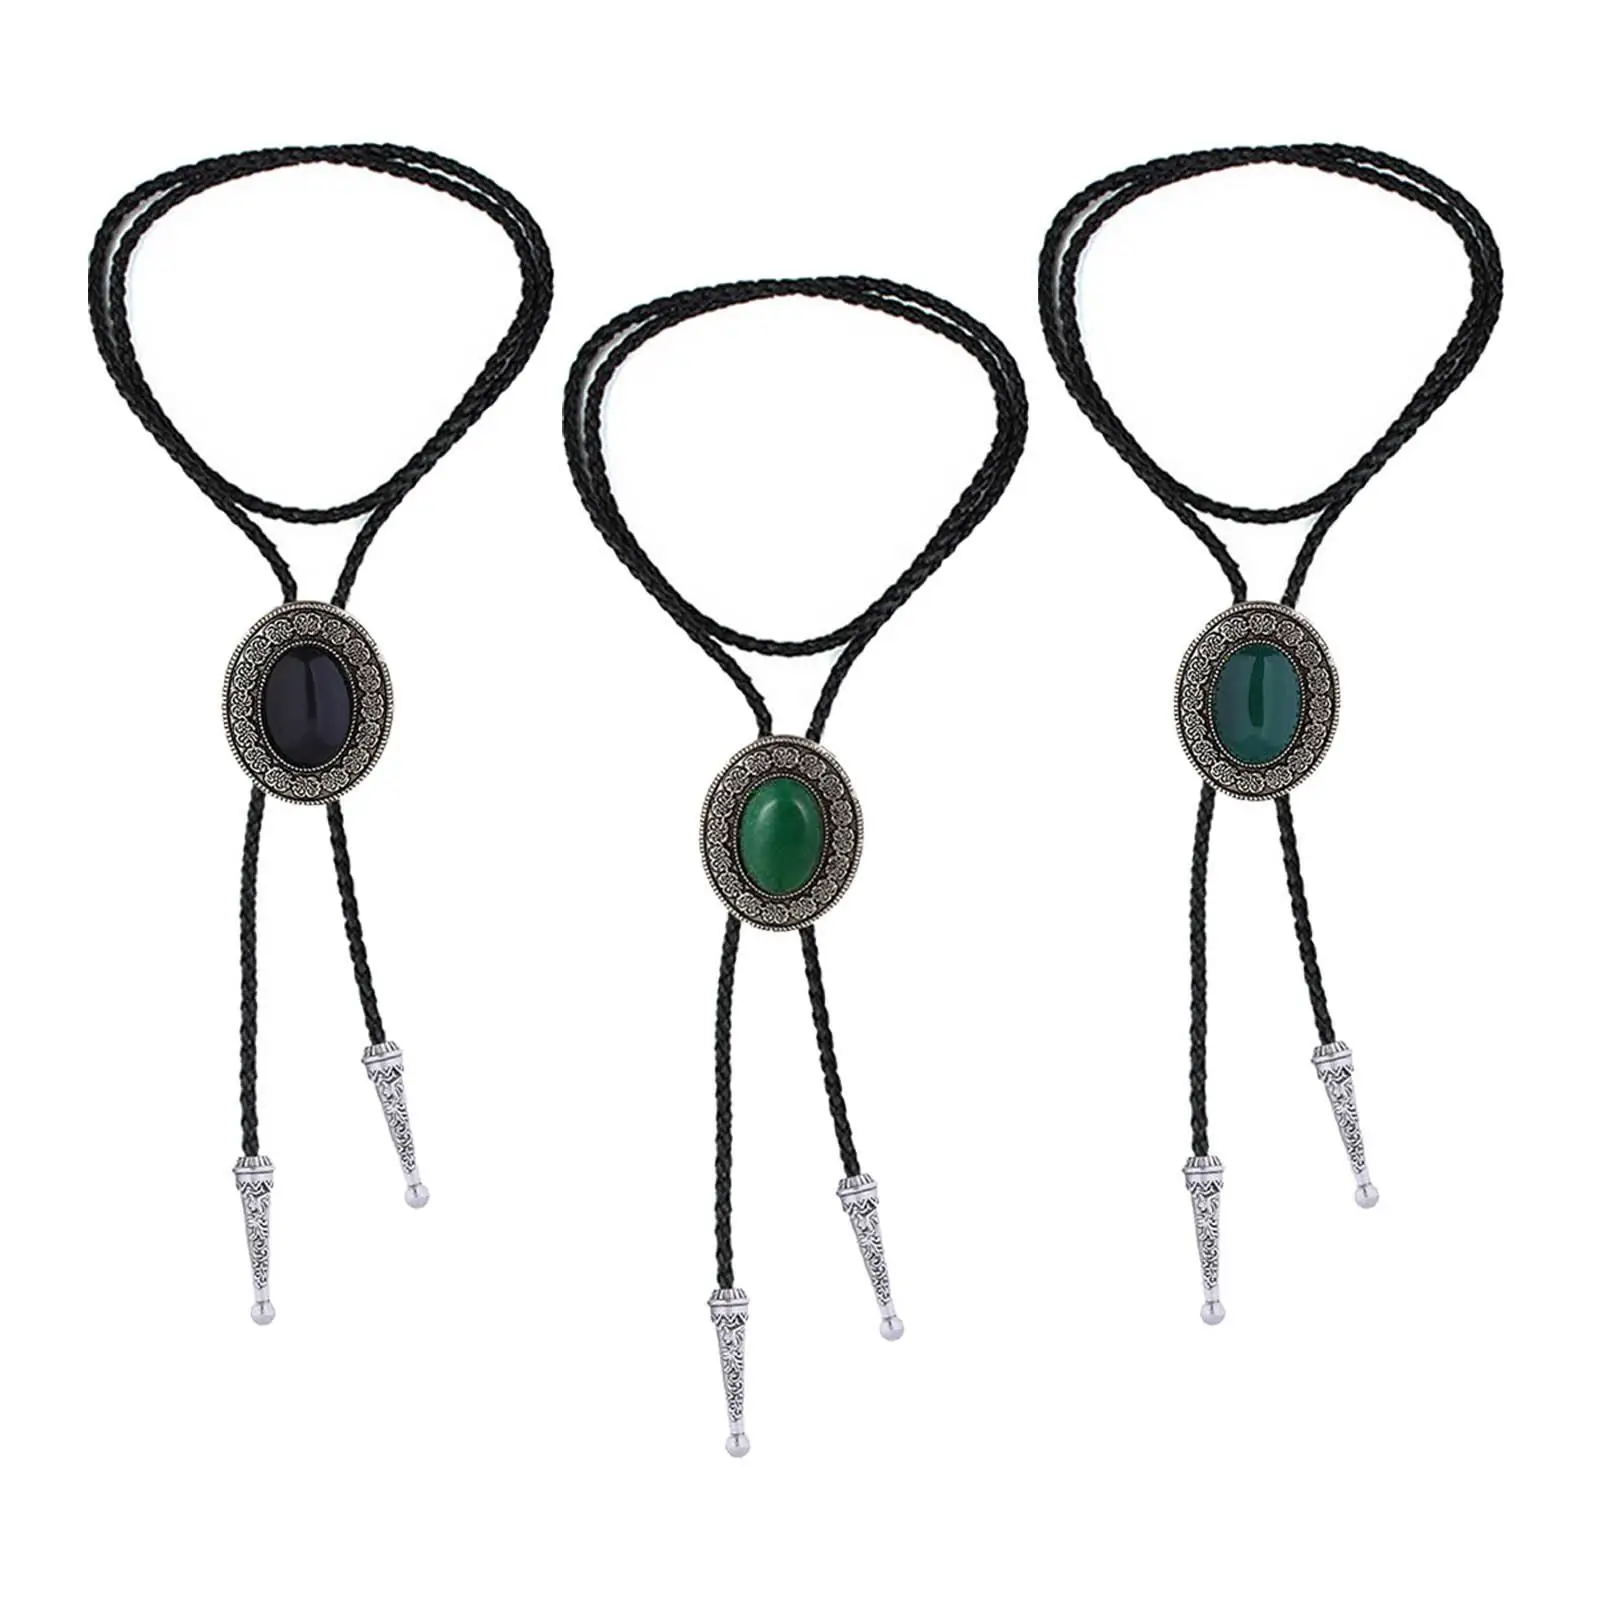 Bolo Tie for Men with Natural  Costume Accessories Round Shape Native Western Collar Rope   String Ties